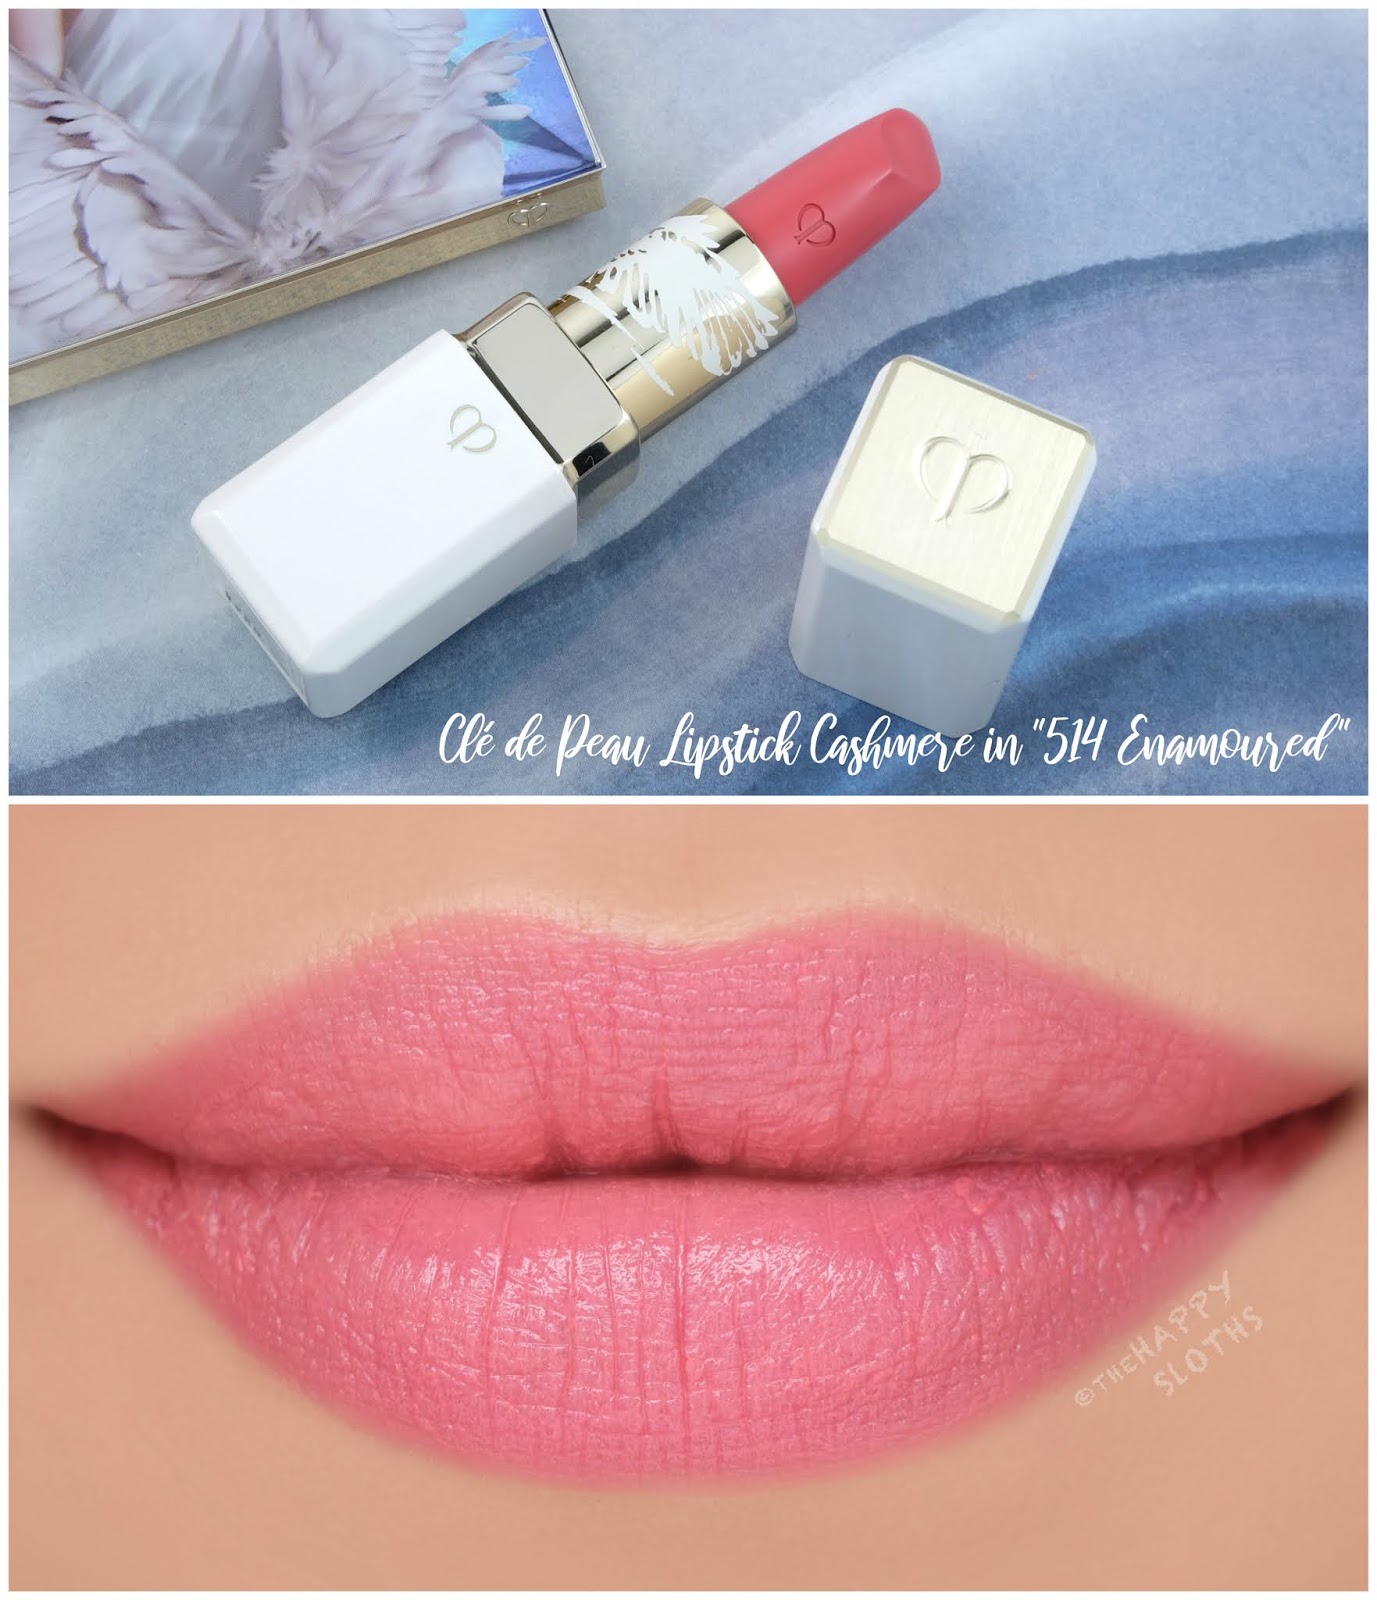 Clé de Peau Beauté | Holiday 2020 Lipstick Cashmere in "514 Enamoured": Review and Swatches